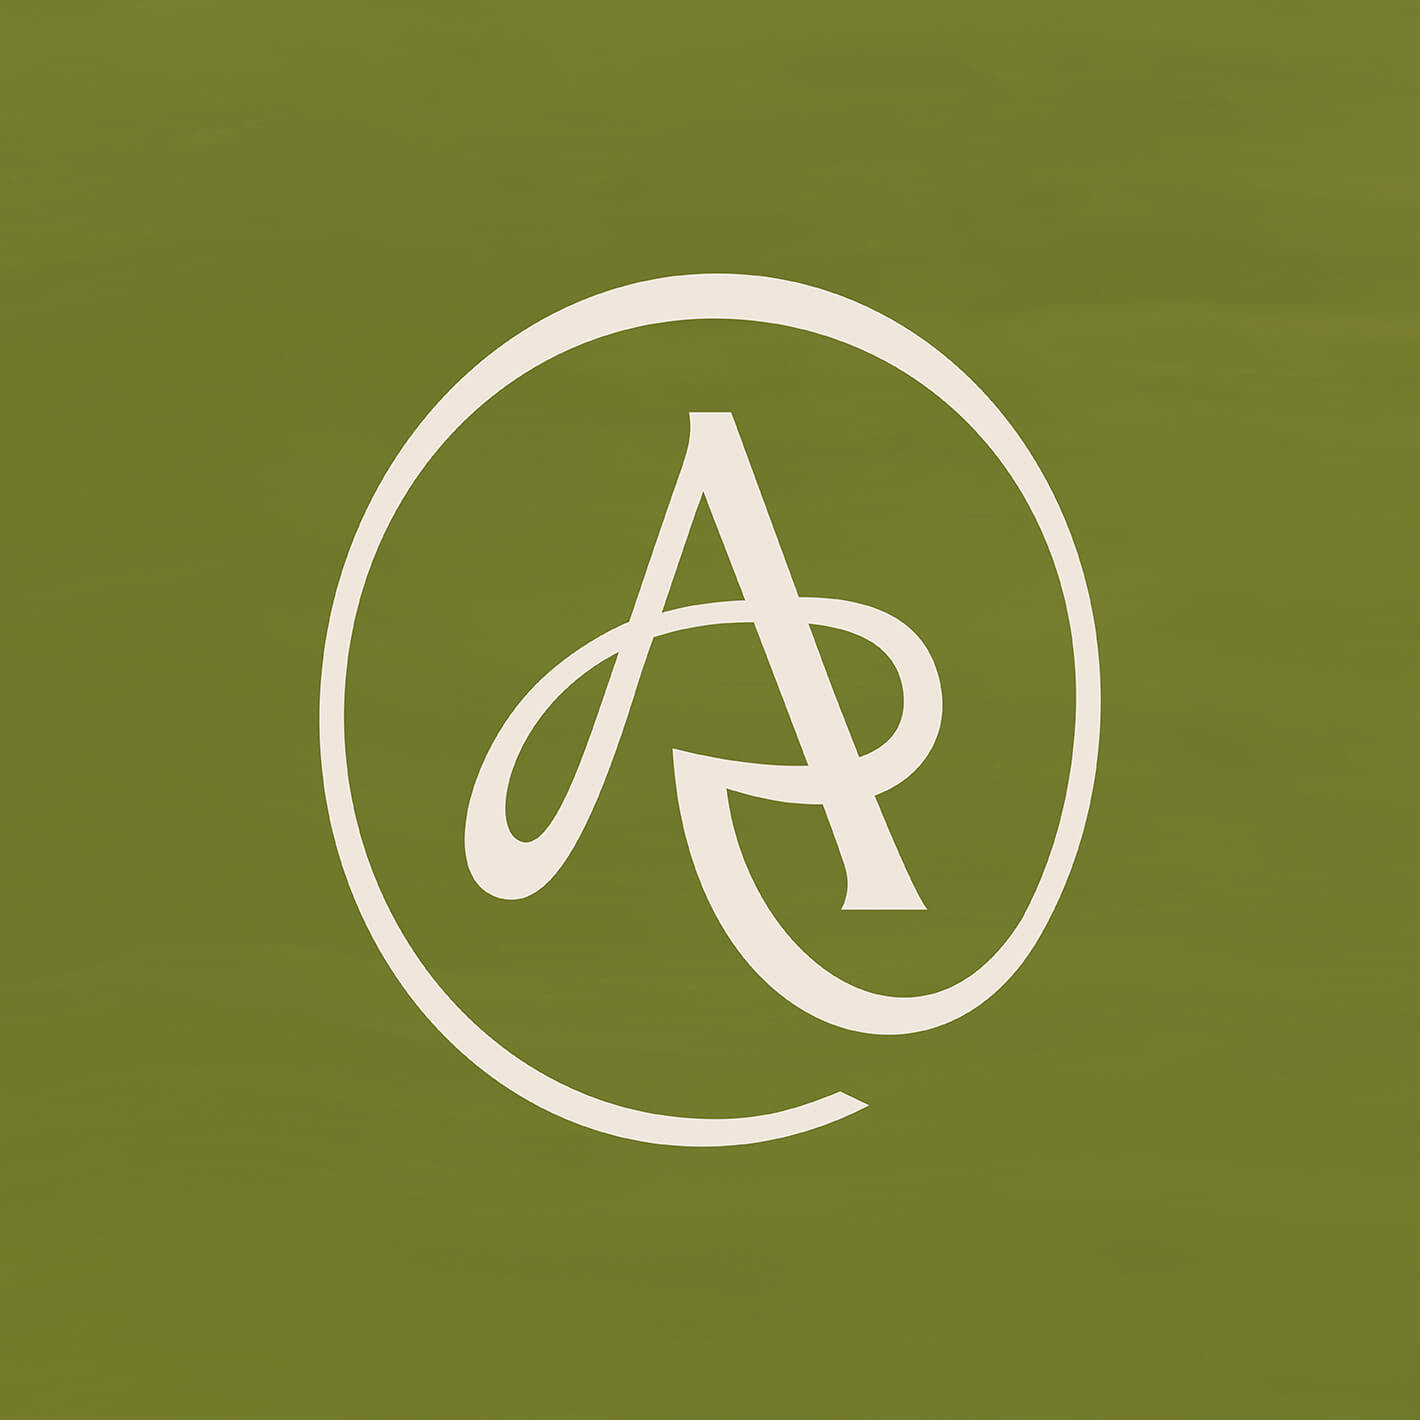 Brand identity case study image of the Anna Rogan brand icon in cream on a dusty green background.